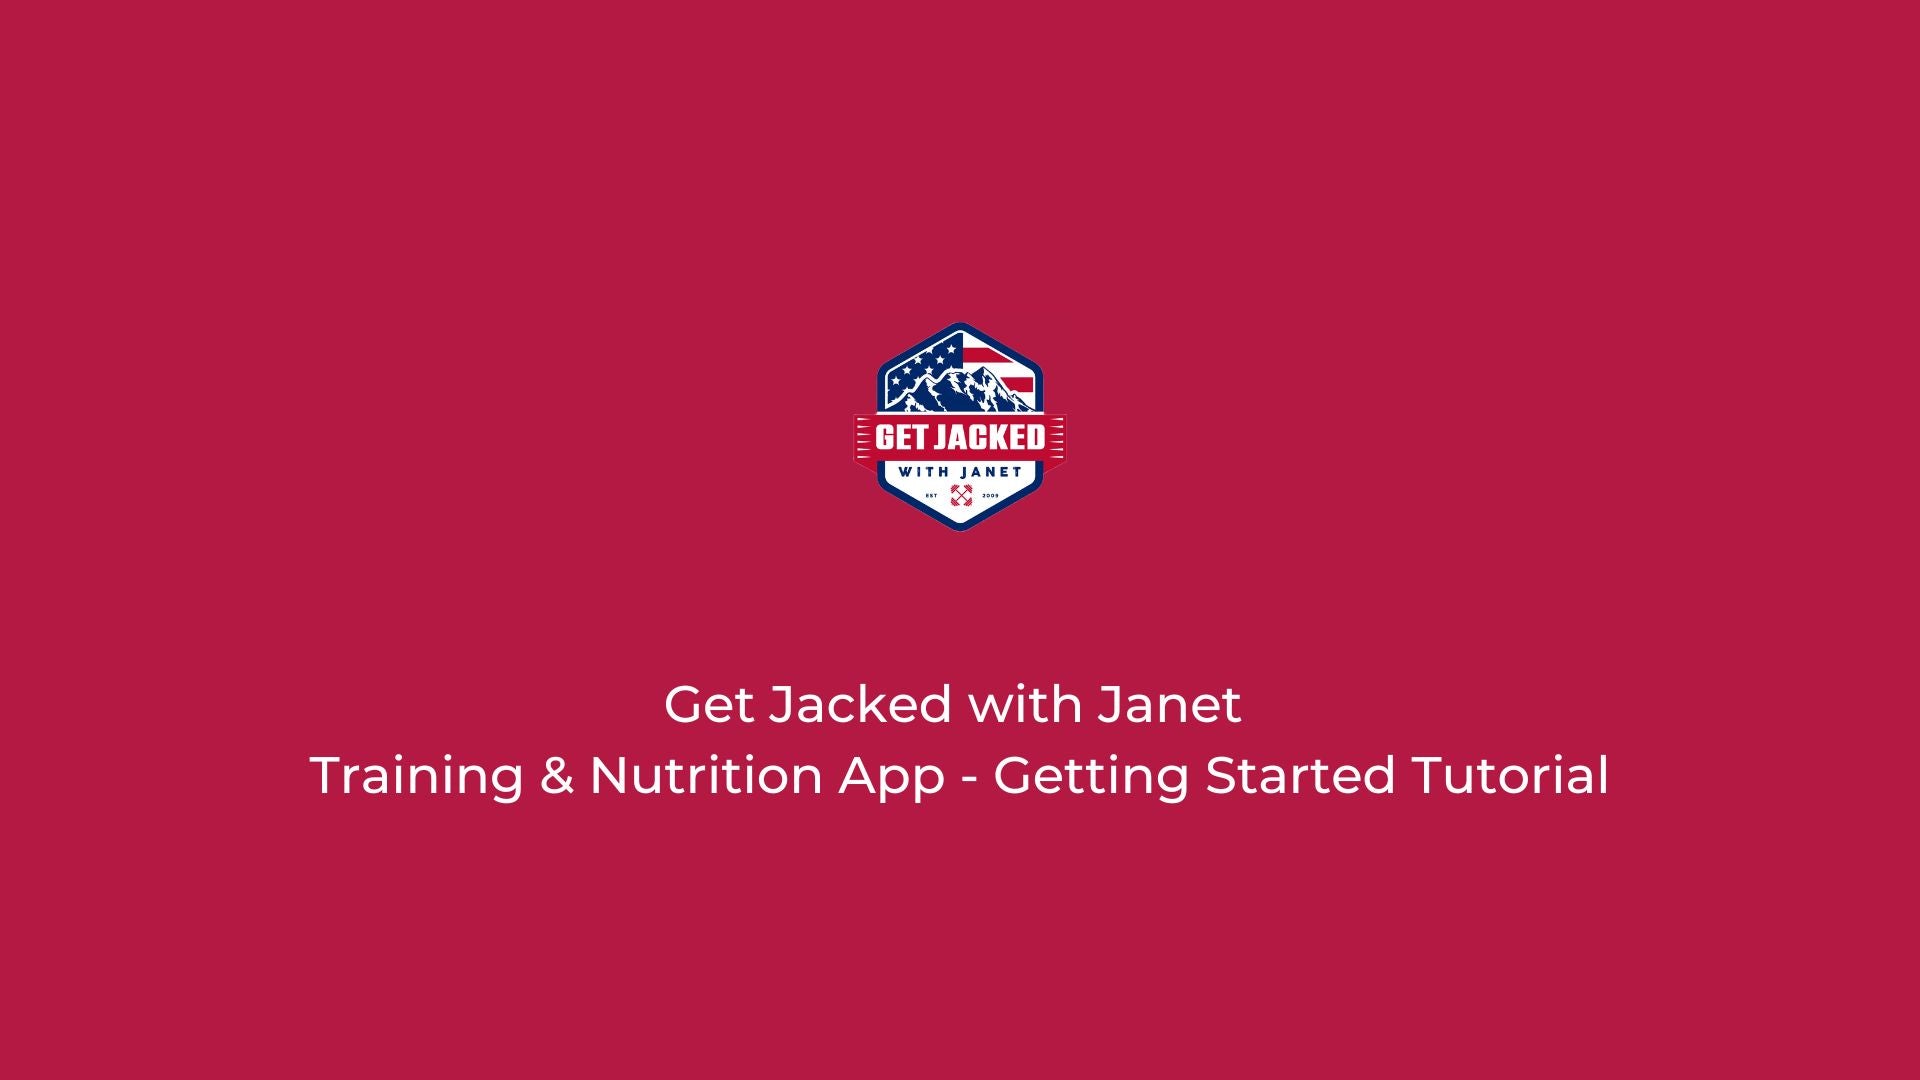 Load video: Get Jacked with Janet Training and Nutrition App Tutorial Video